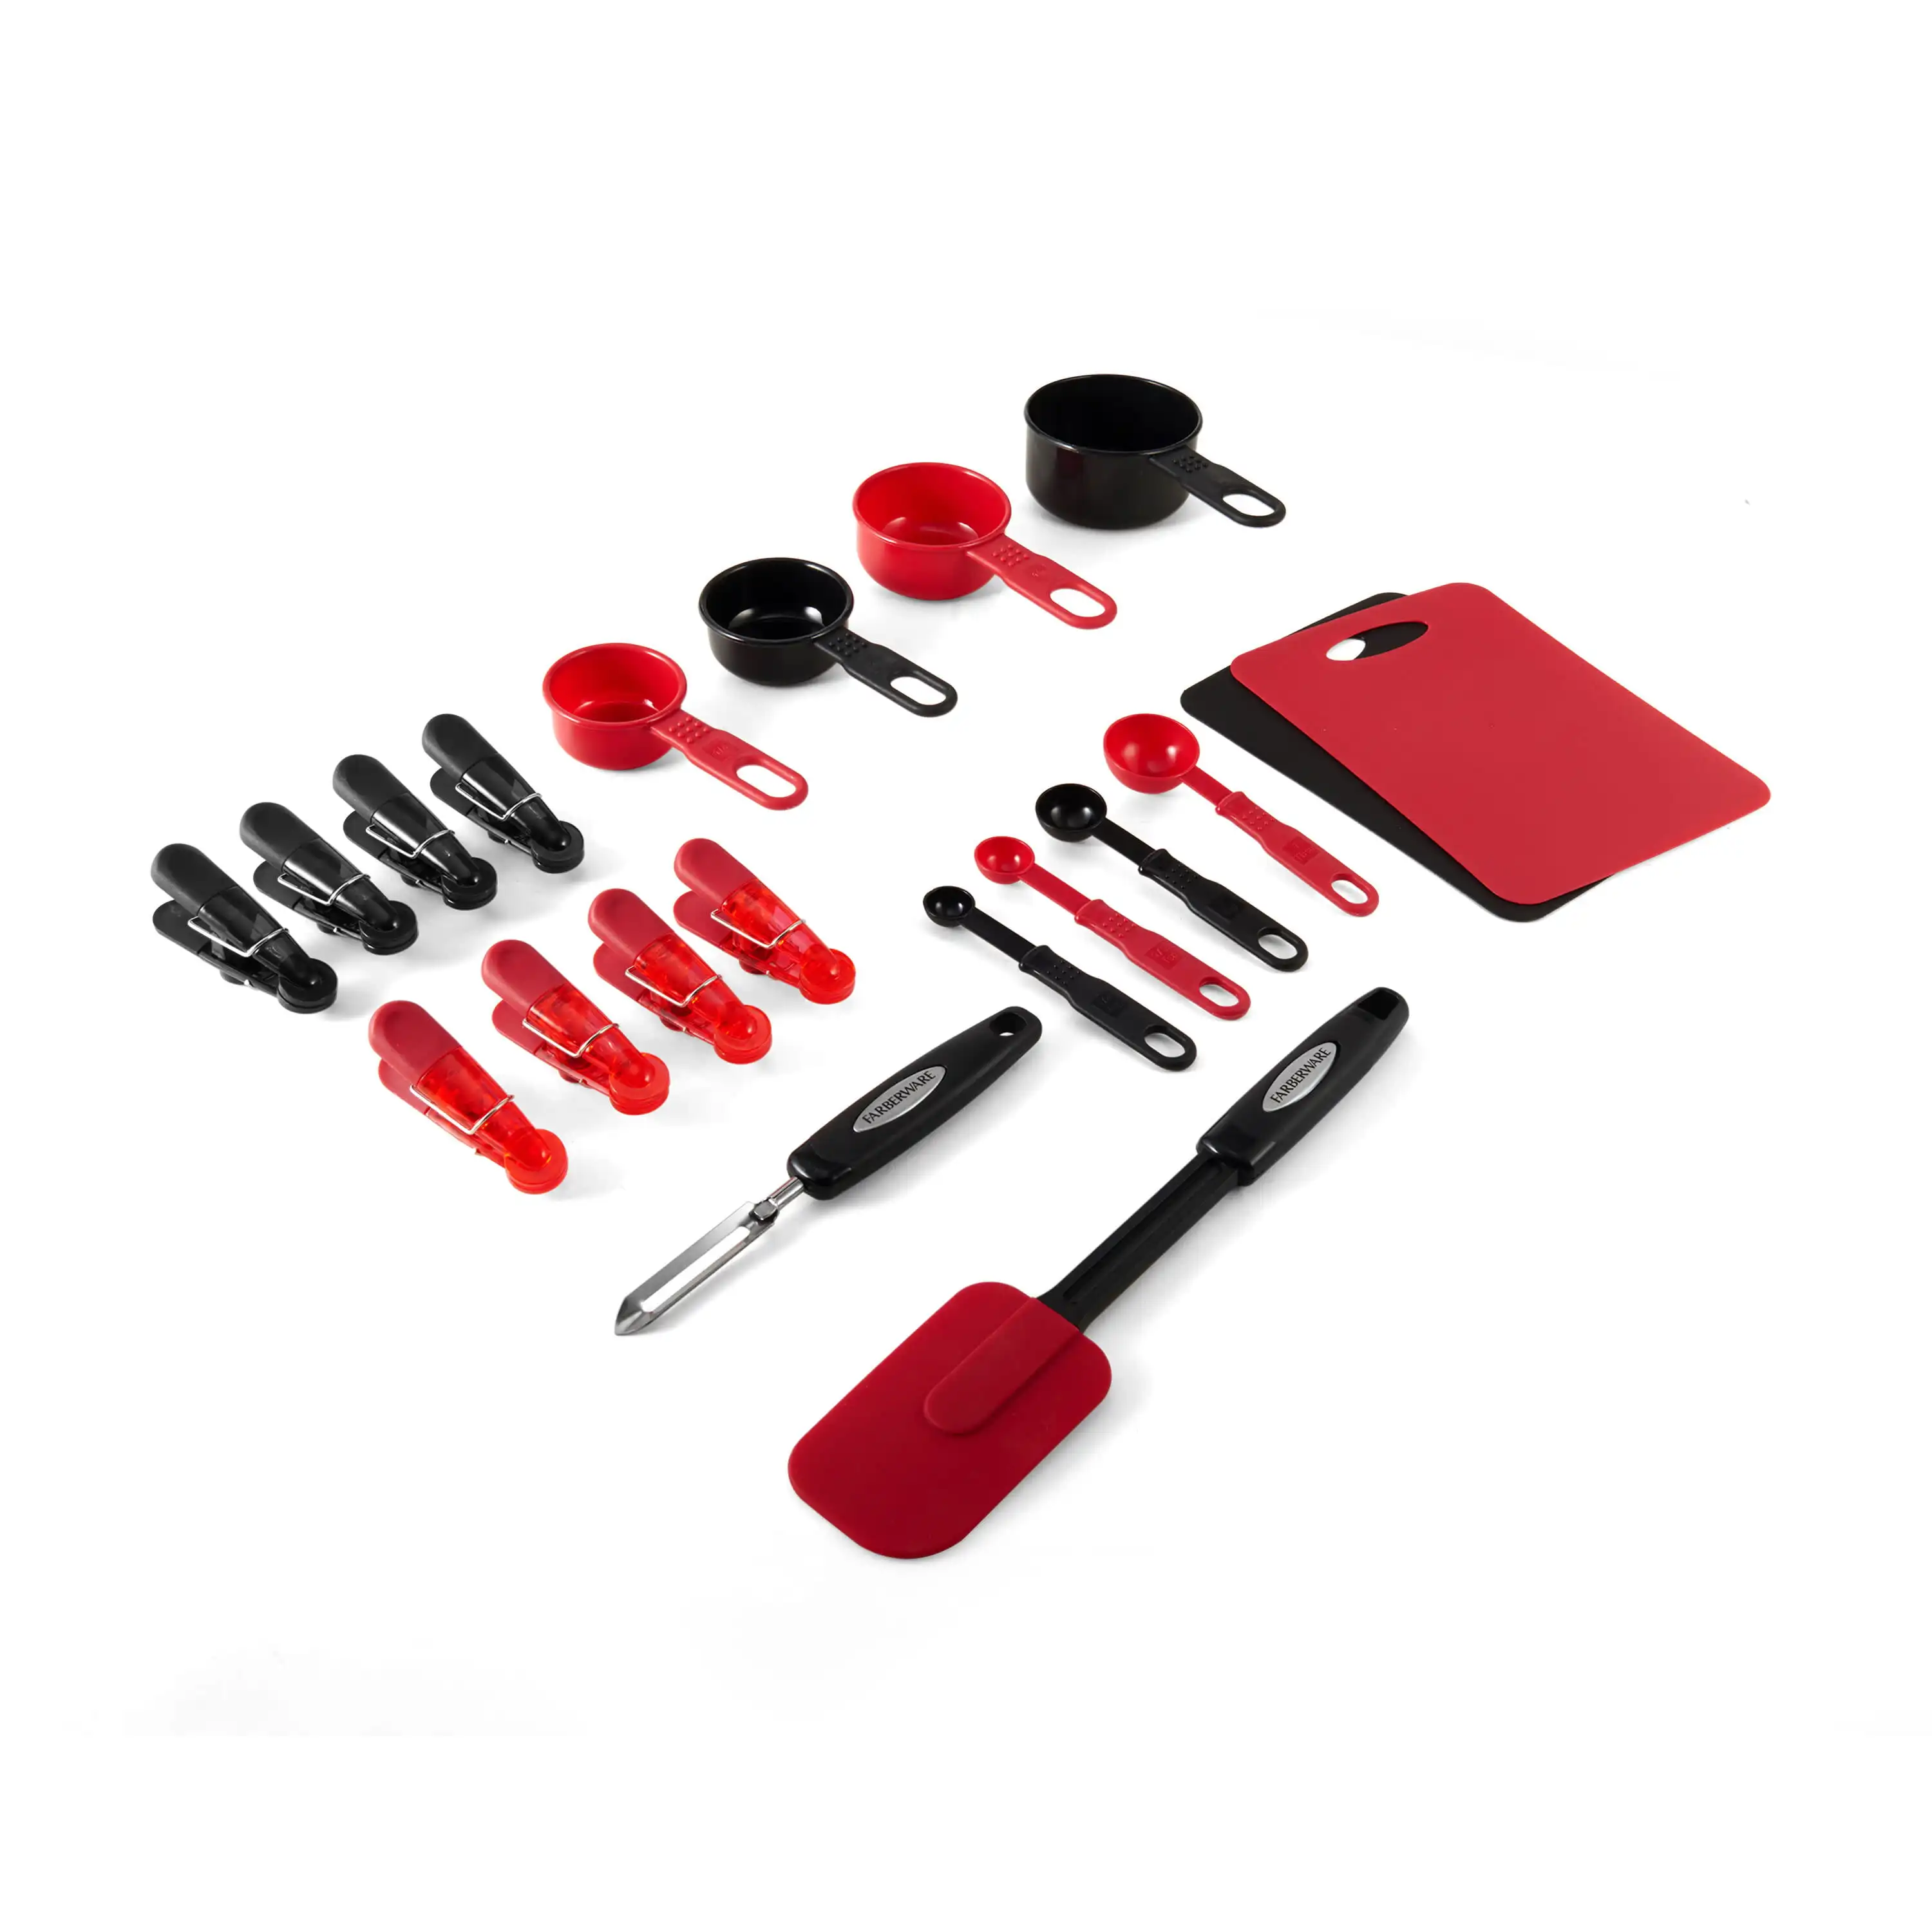 https://ae01.alicdn.com/kf/Sac9743ca03ca4dcb96720a0f0d8e5d3aa/Professional-30-piece-Black-and-Red-Kitchen-Tool-and-Gadget-Starter-Set-Kitchen-Gadgets-Home-Gadgets.jpg